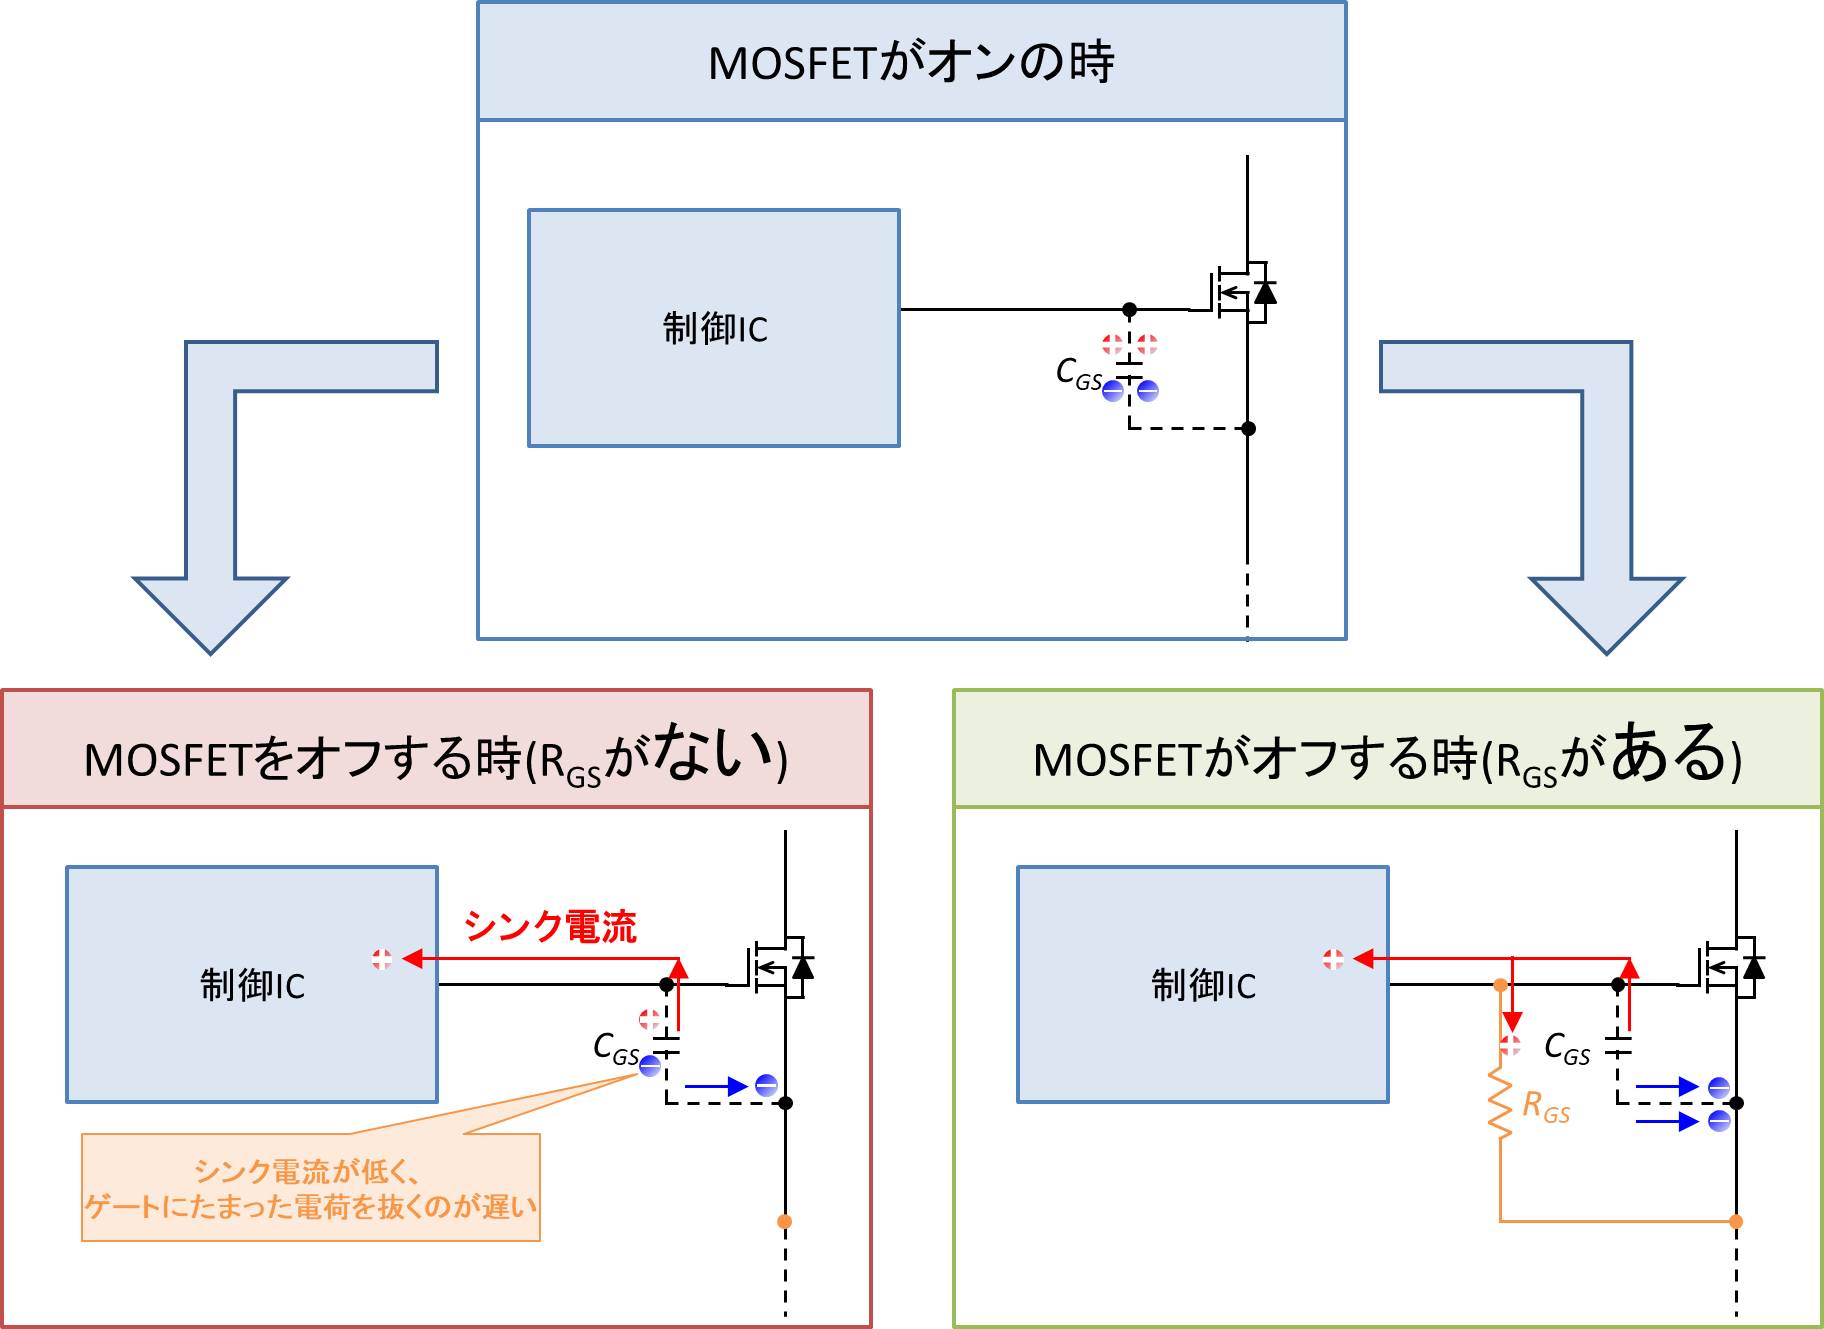 MOSFETにゲートソース間抵抗を接続する理由３